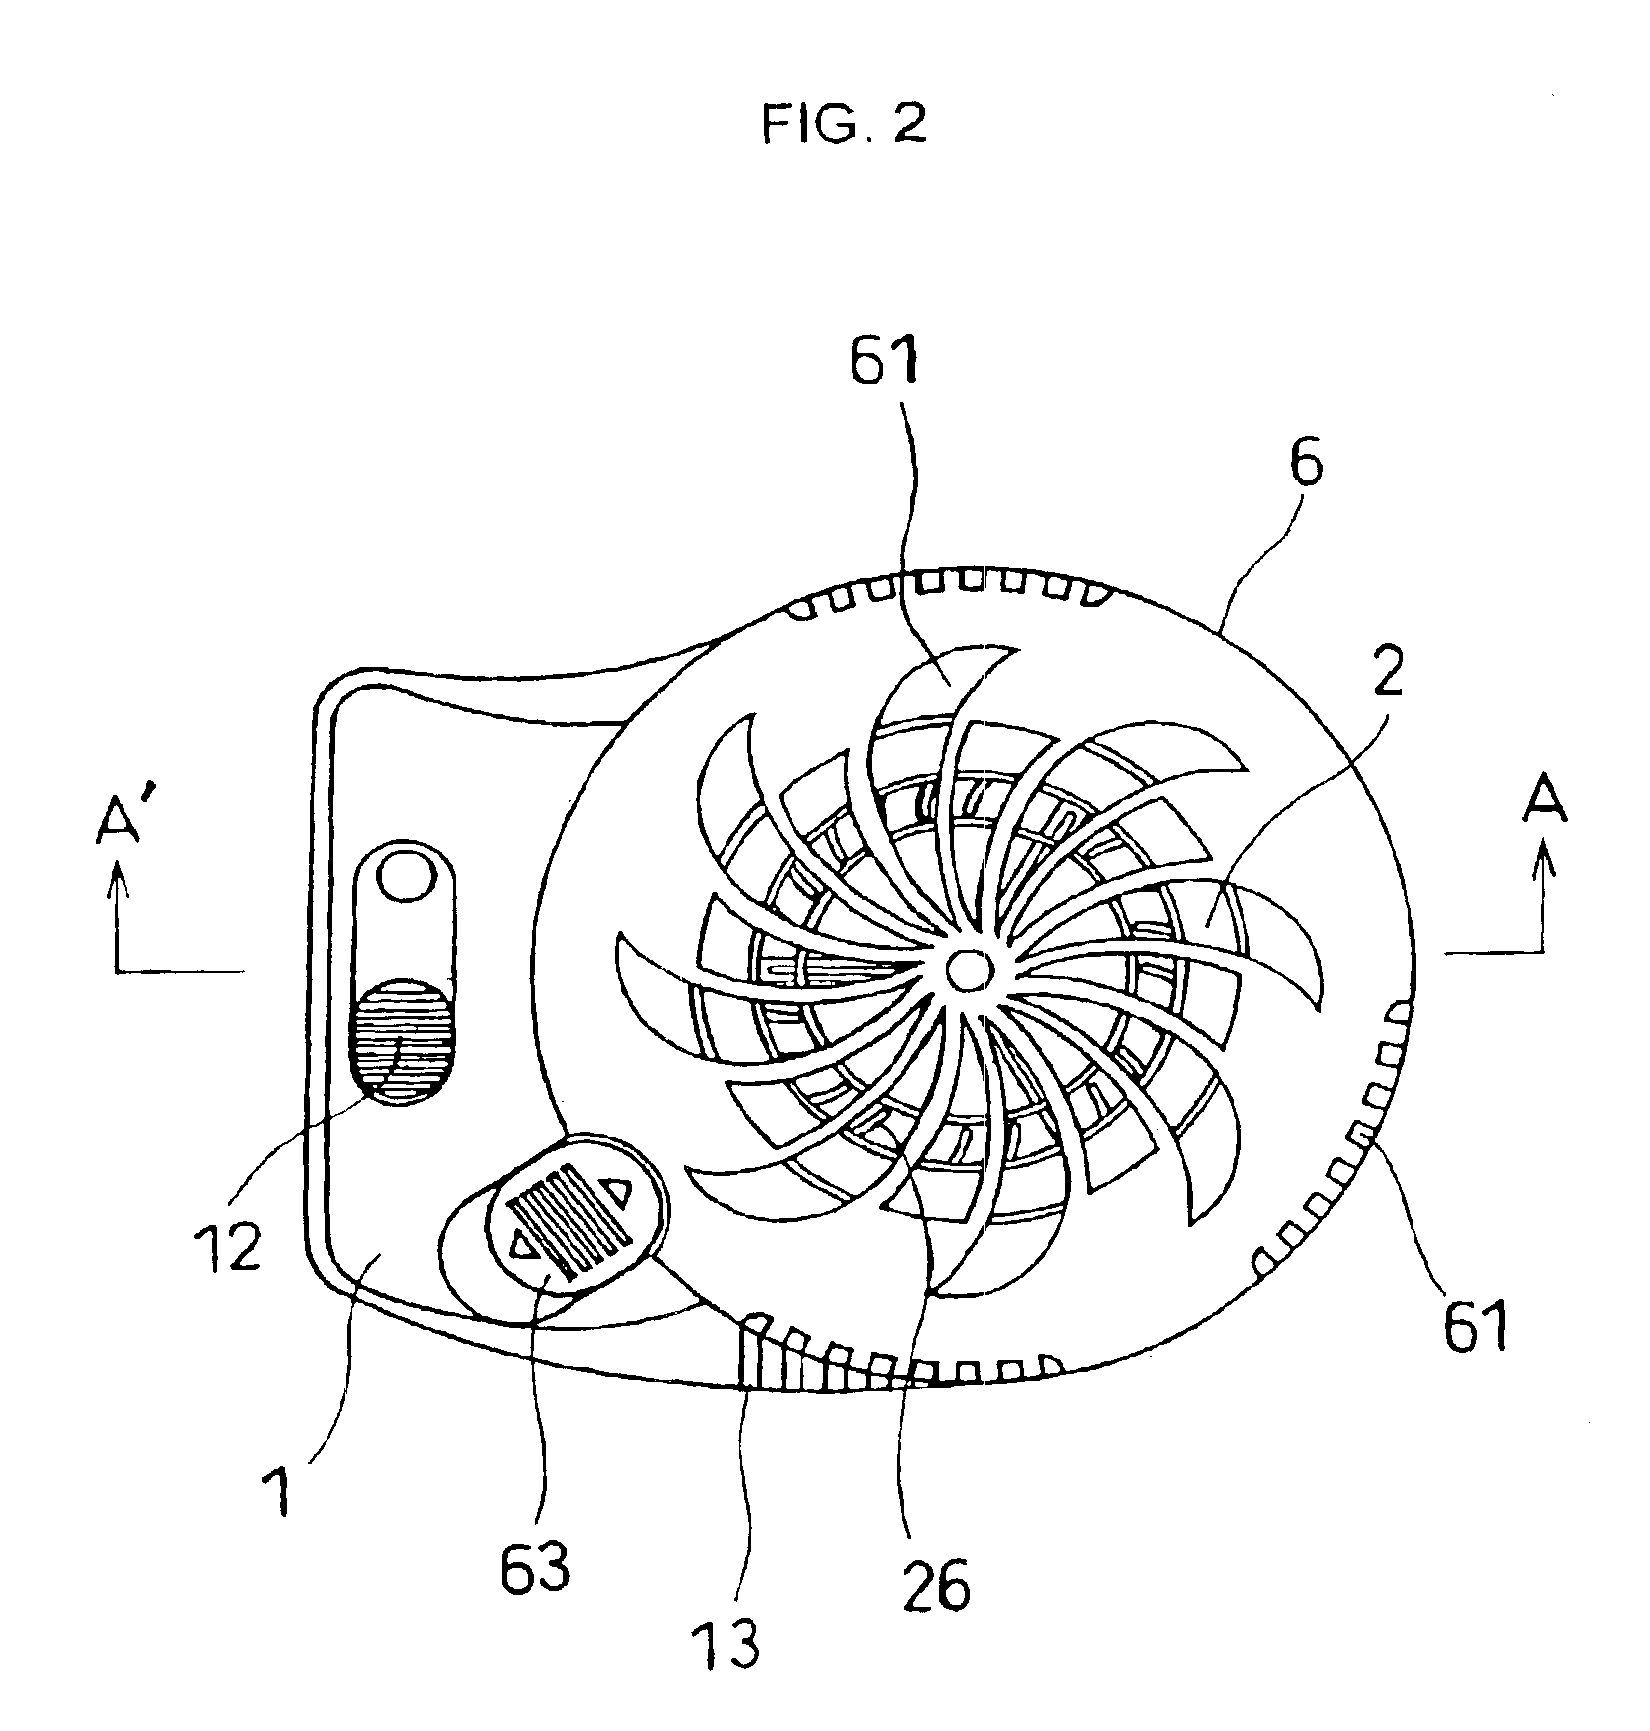 Insecticide transpiration apparatus